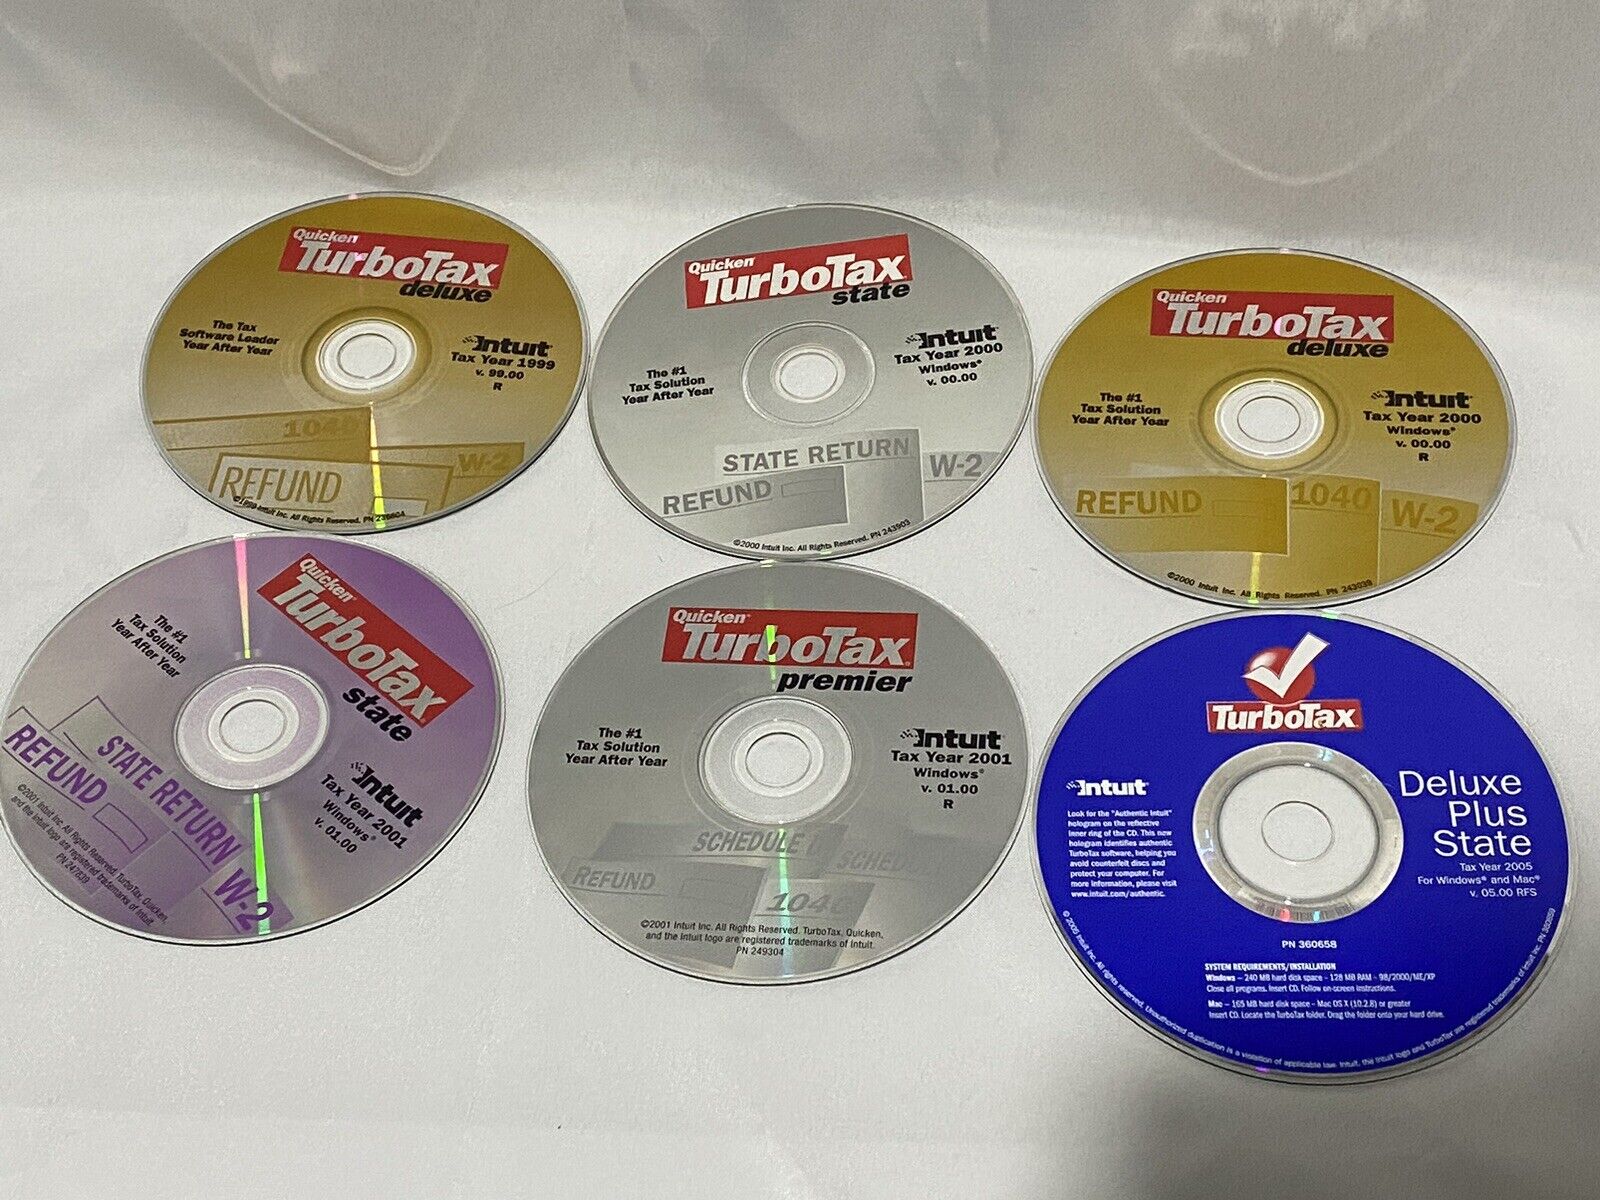 Quicken TurboTax State, Deluxe and Premier Years 1999-2001 & 2005 PC Disks